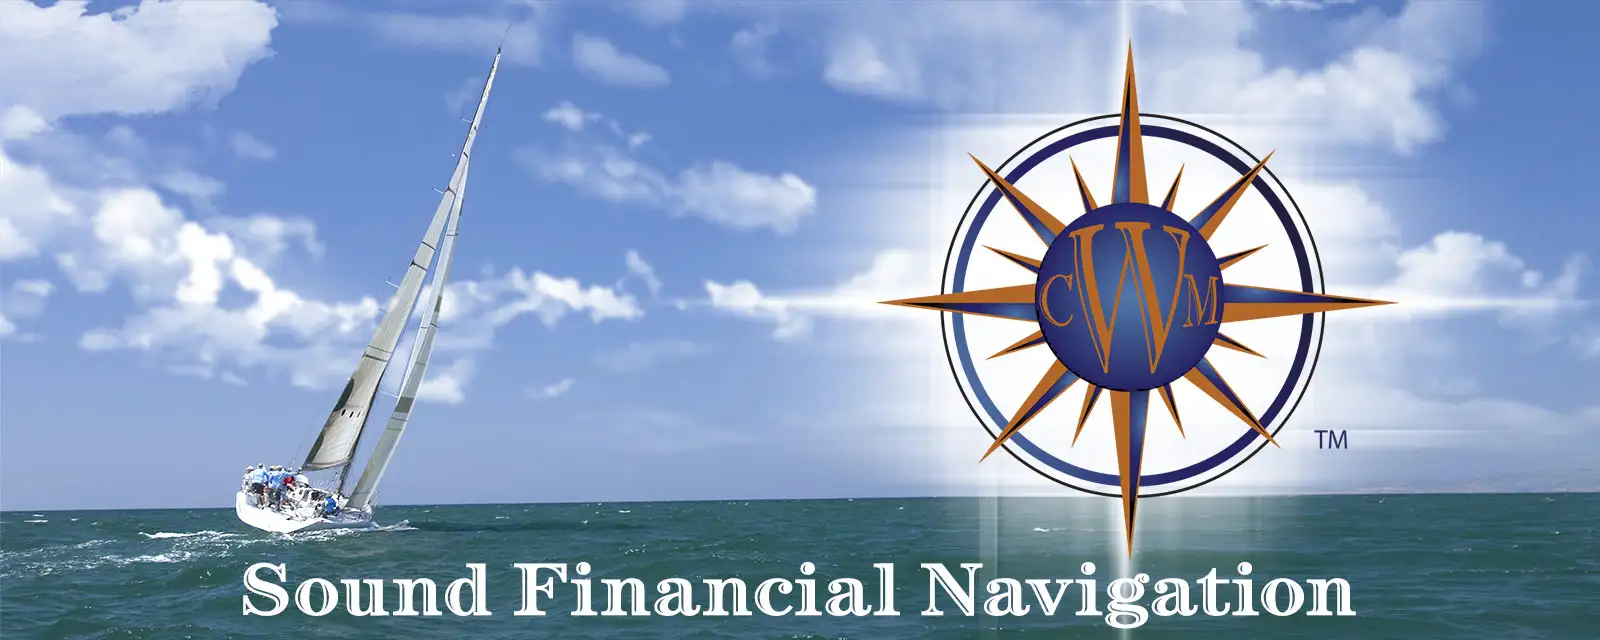 sound financial navigation banner with sailboat